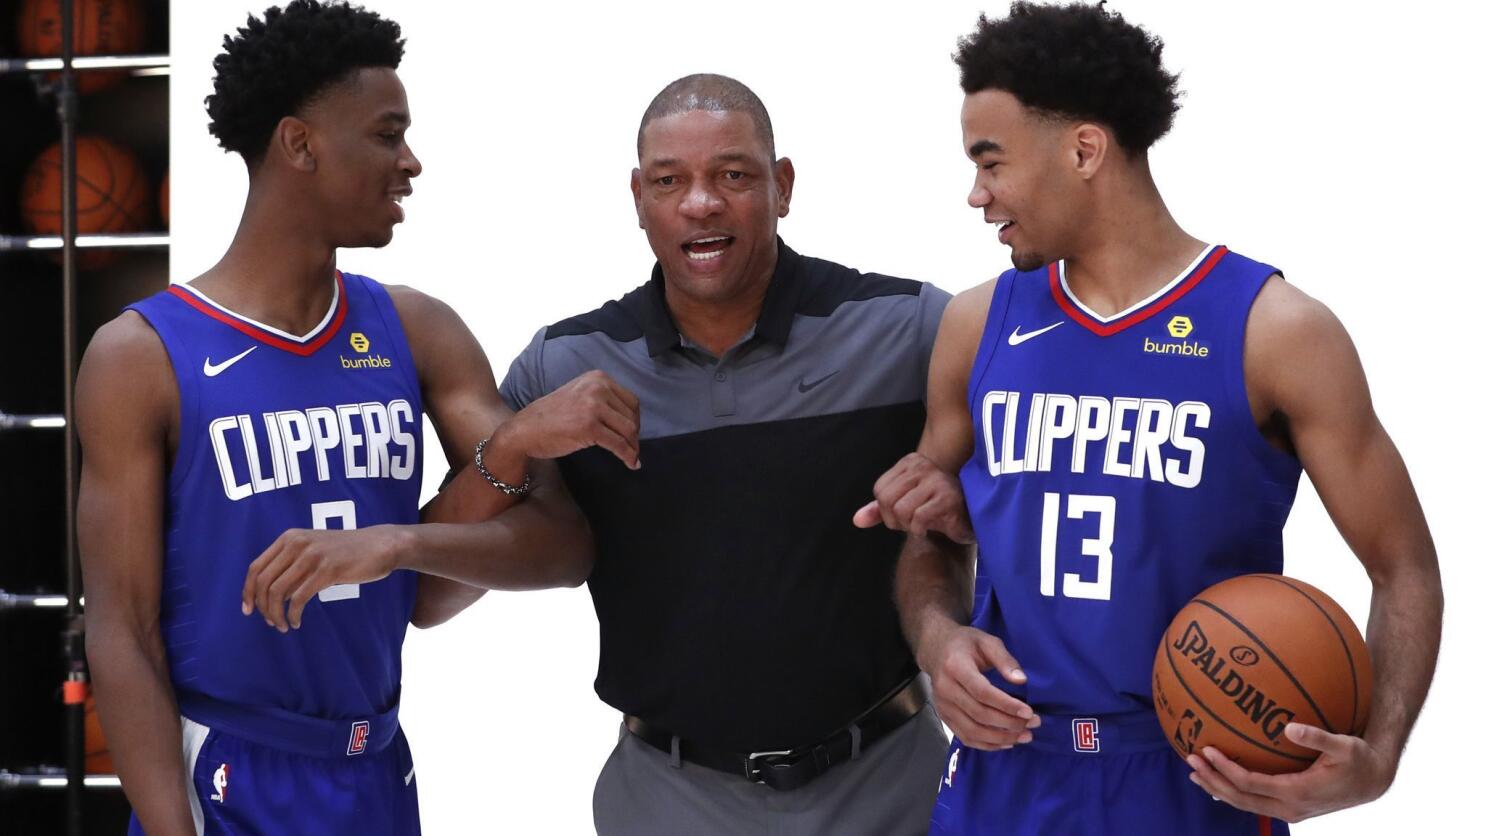 Inside the life of NBA assistant coaches: “Every day is Wednesday to me”